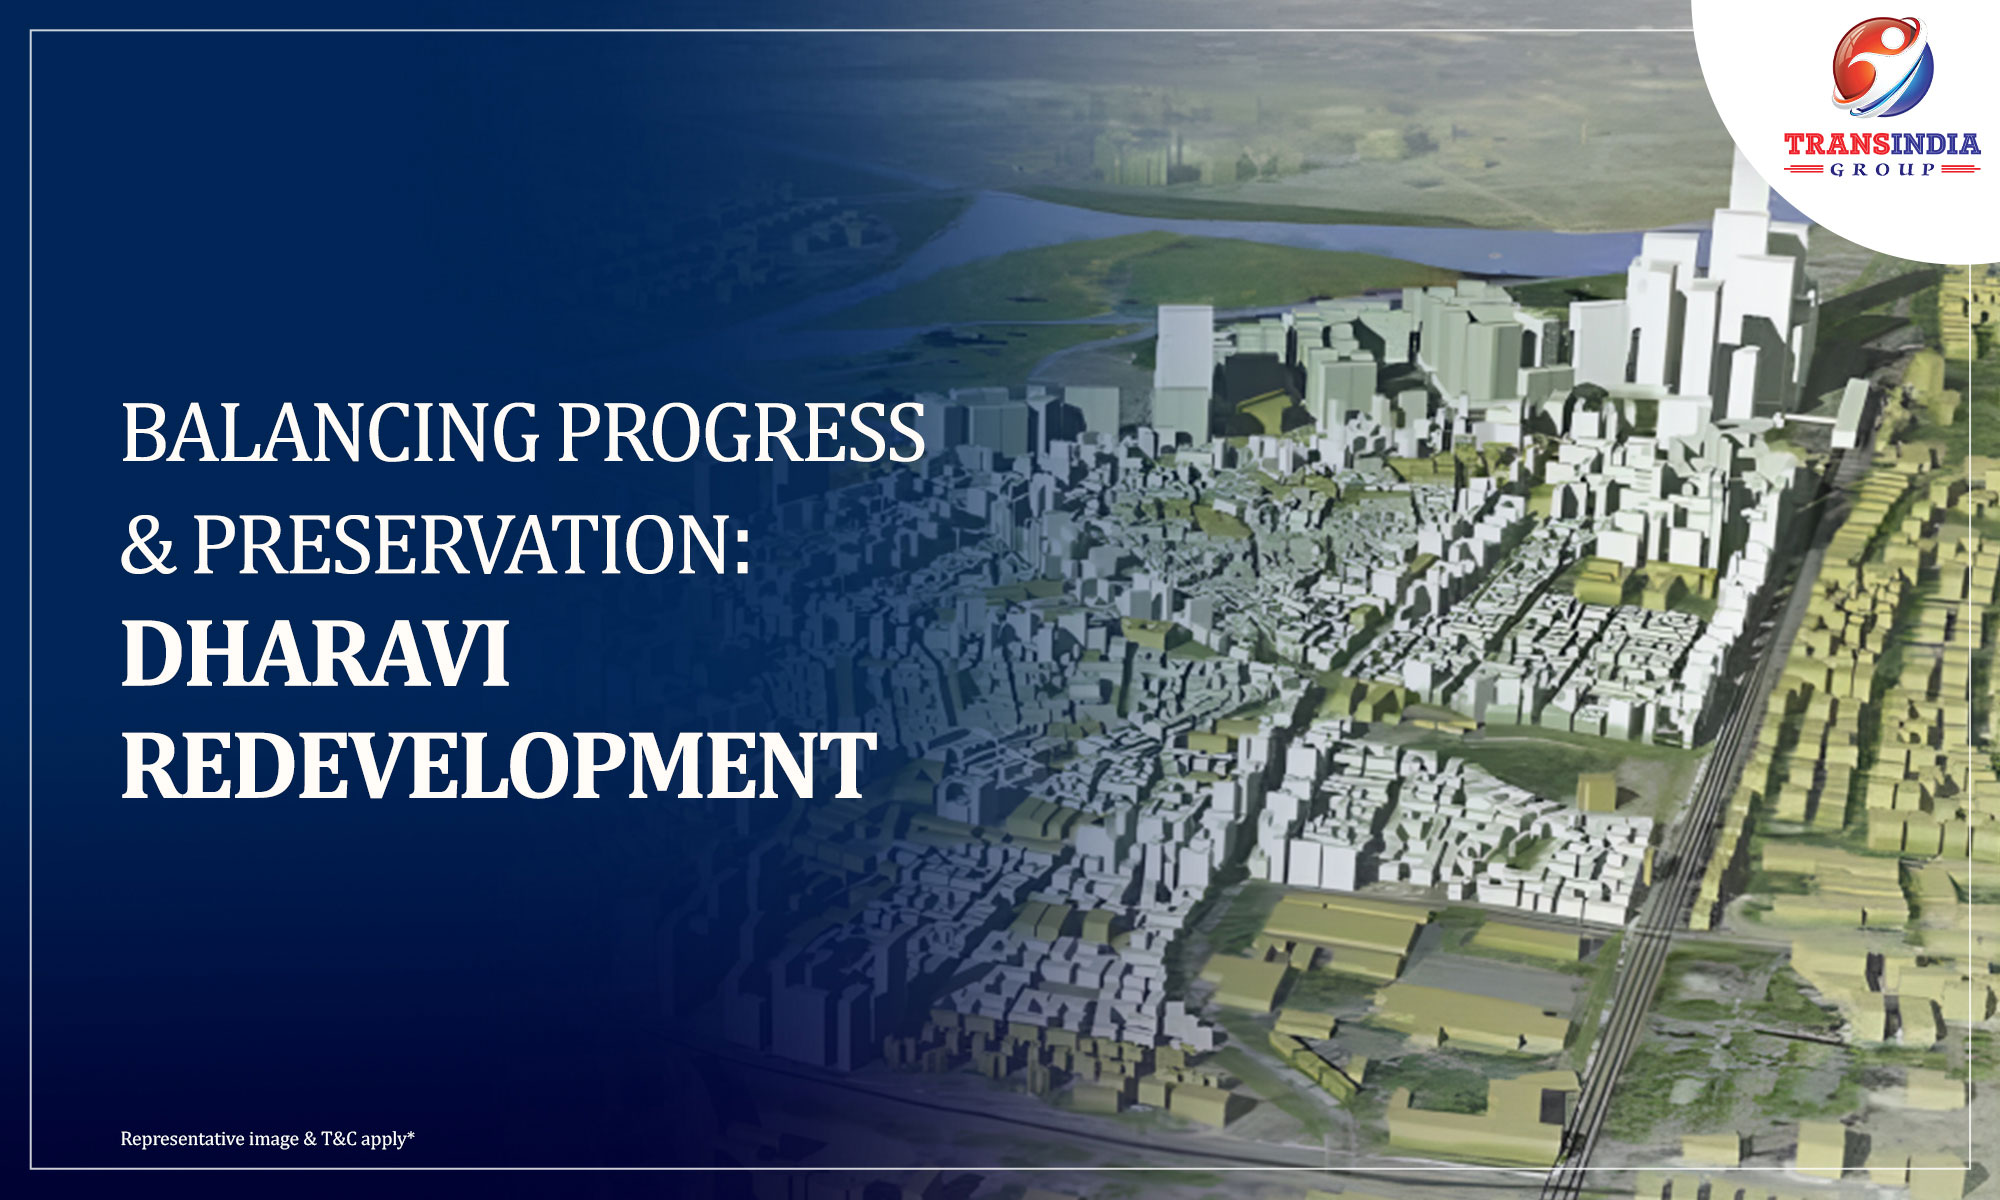 Dharavi Redevelopment: A New Chapter Begins